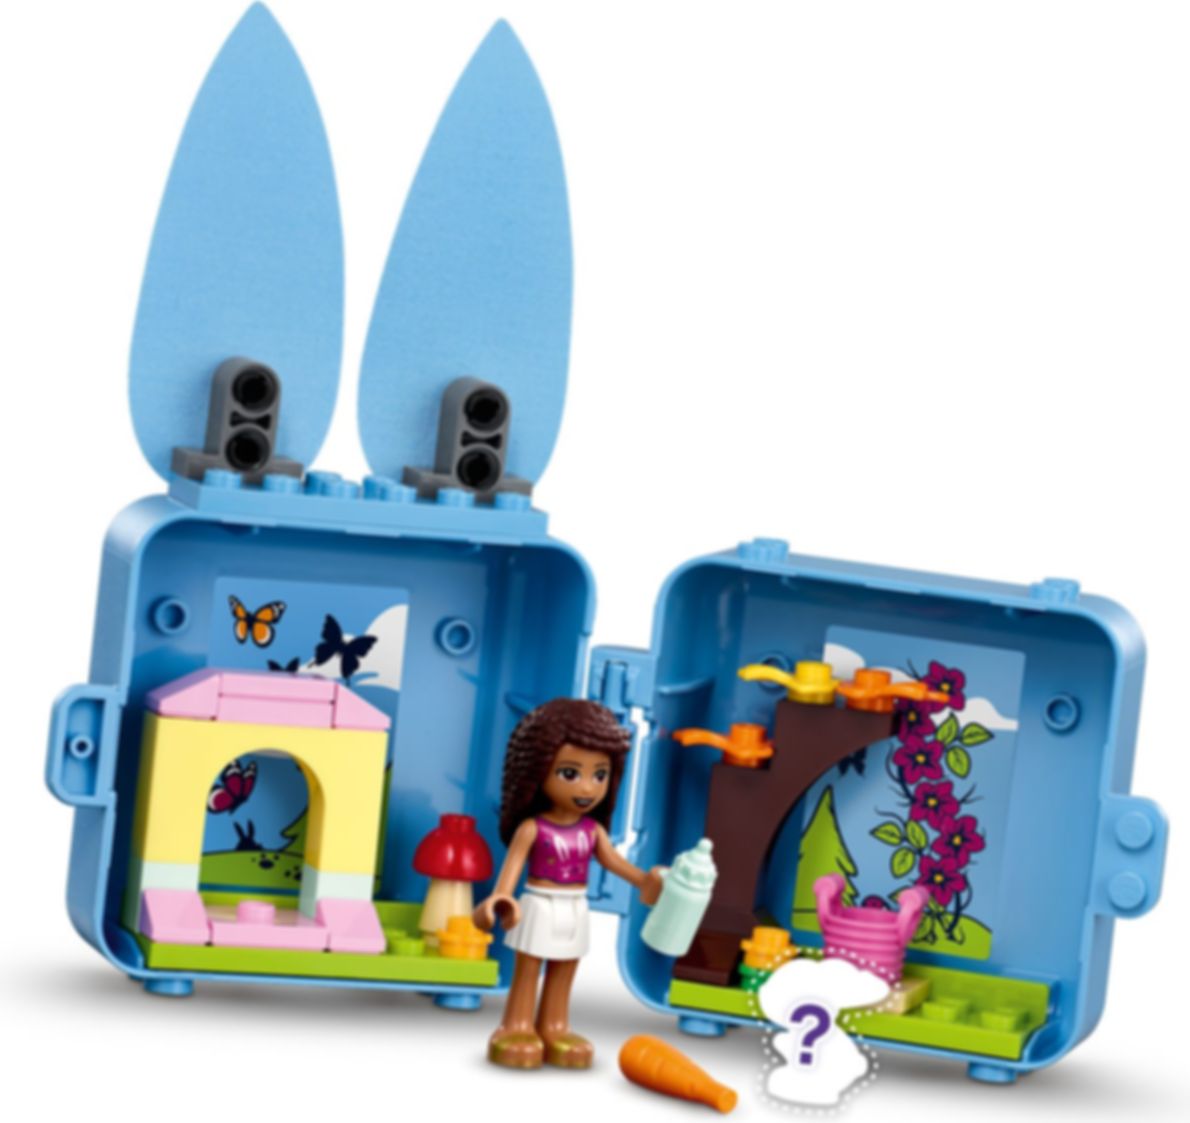 LEGO® Friends Le cube lapin d'Andréa gameplay